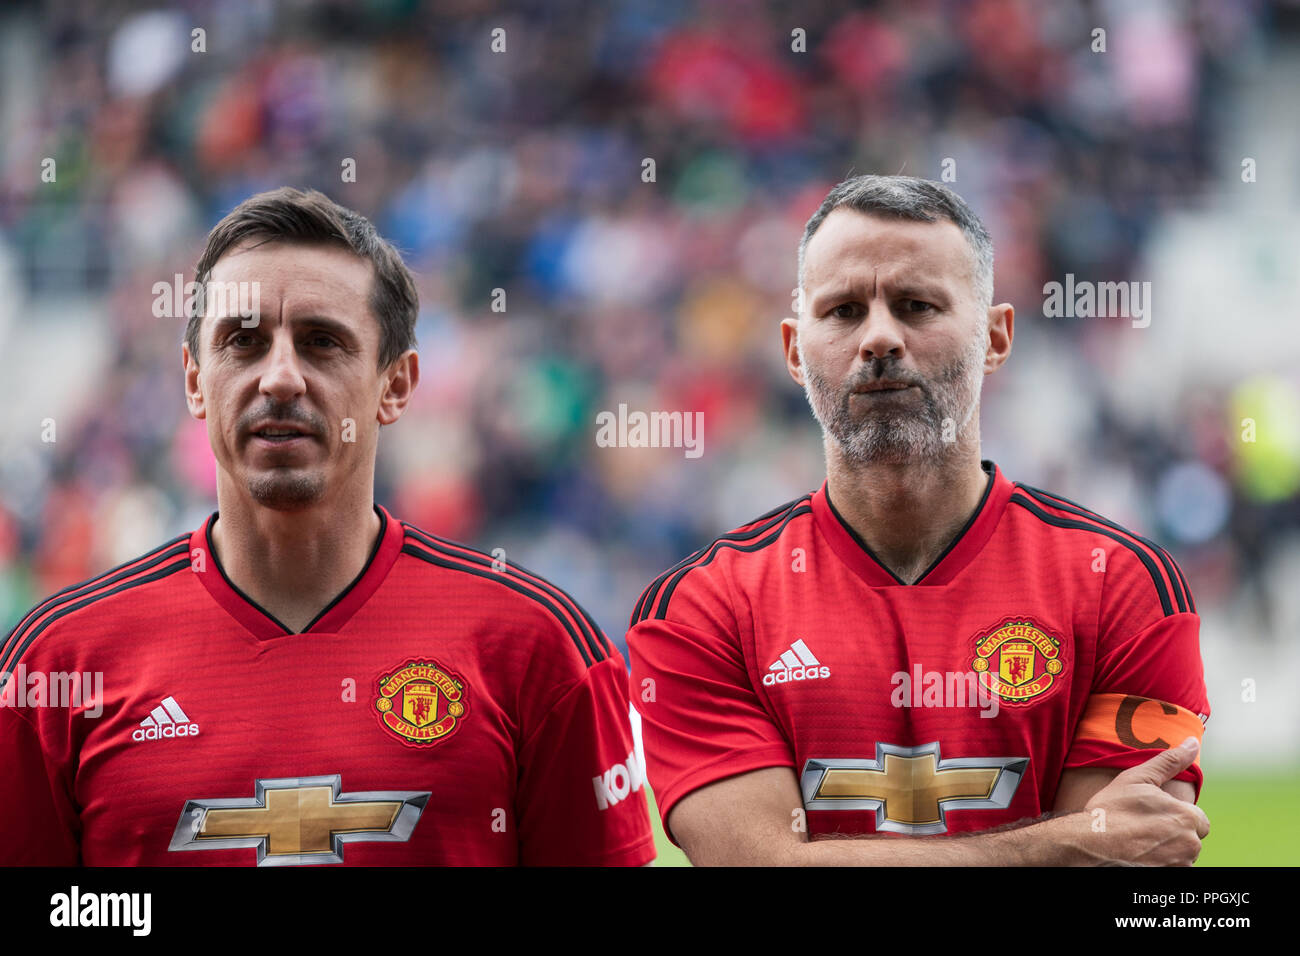 Cork, Ireland, 25 September 2018. Gary Neville and Ryan Giggs line up at  Pairc Ui Chaoimh pitch, for the Liam Miller Tribute match between Ireland  and Celtic XI vs Manchester United XI,